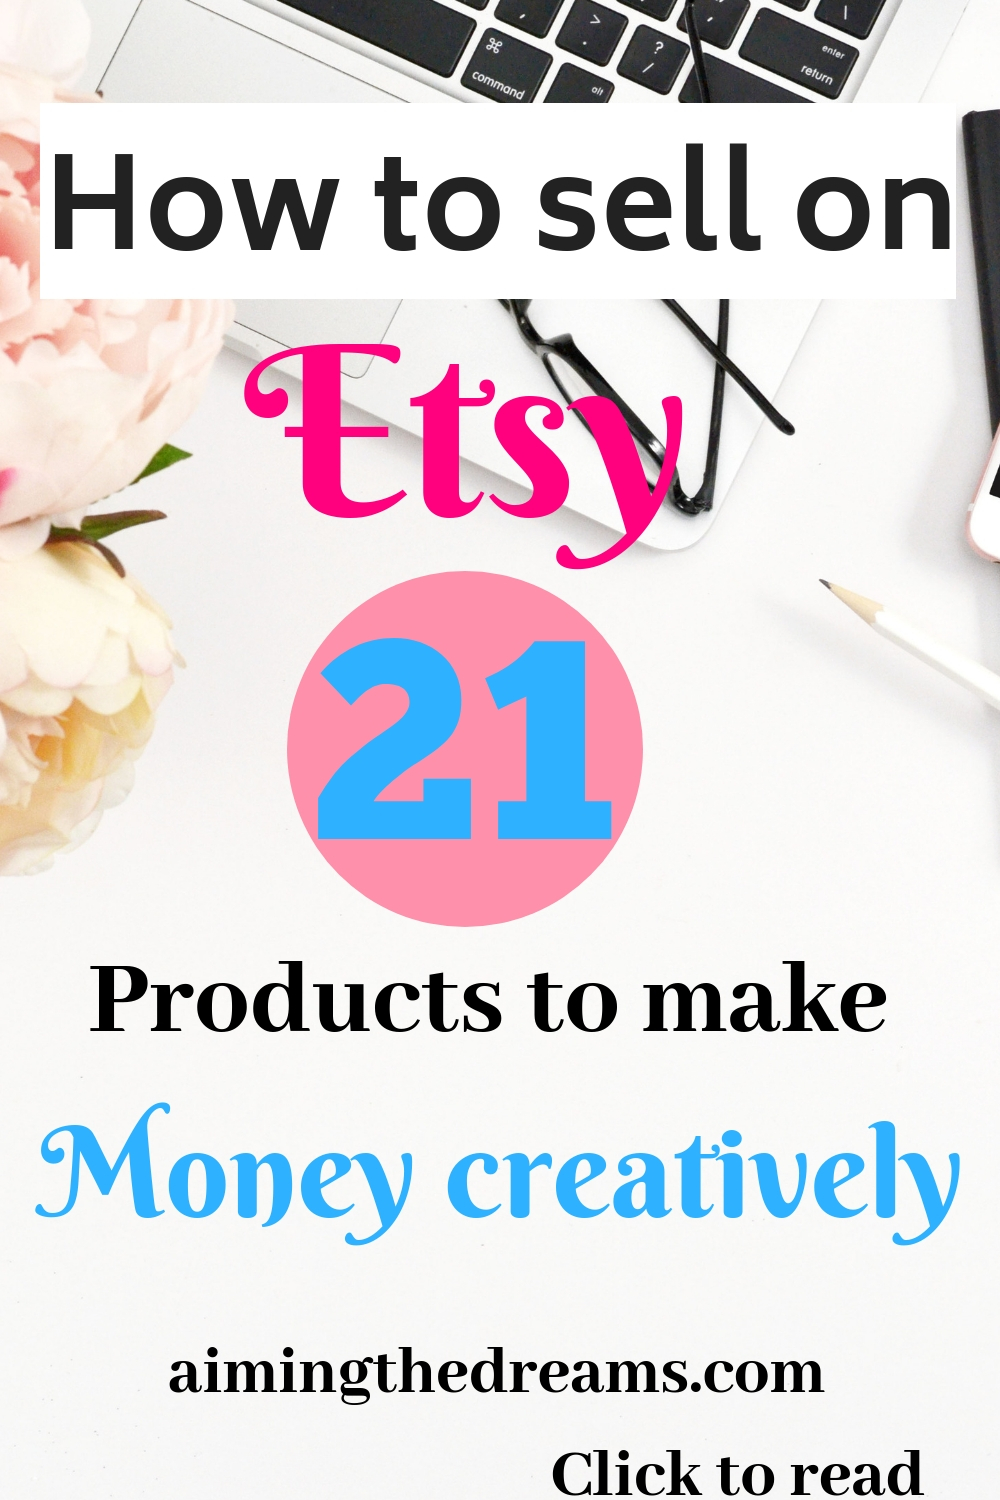 Etsy shop ideas to make money with your creaticity. click to read